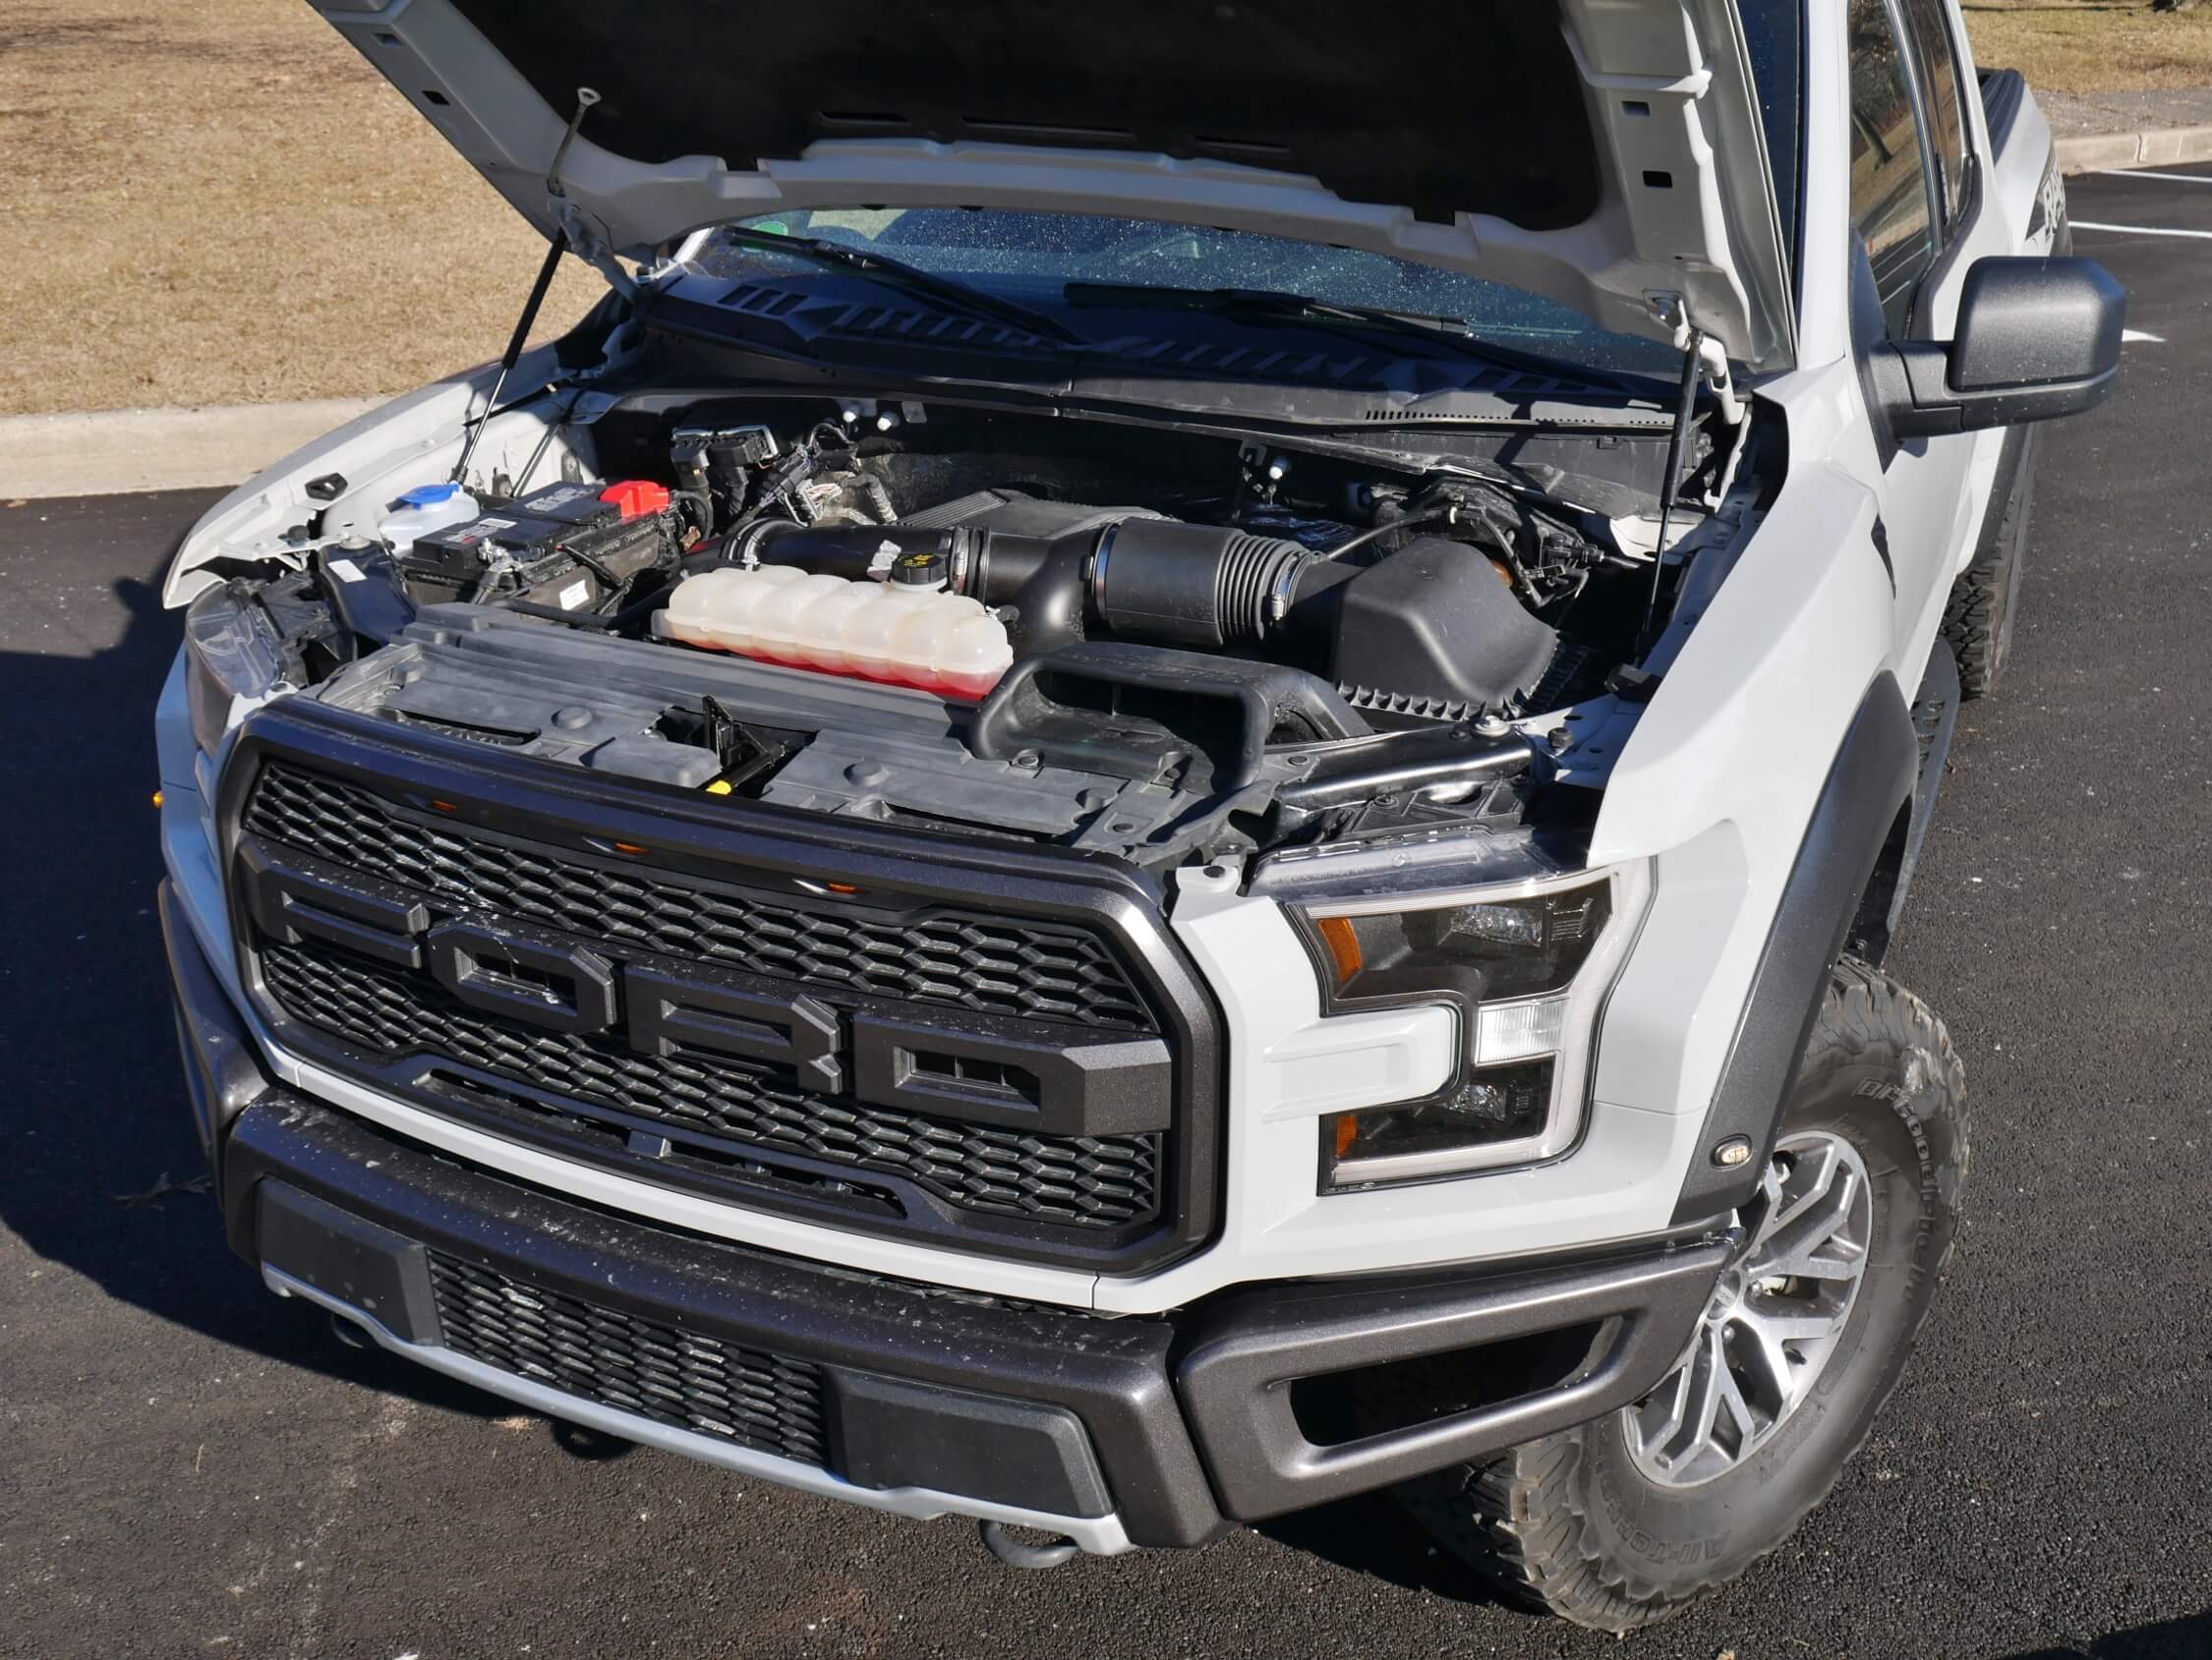 2018 Ford F-150 Raptor SuperCab: 18 psi boost intercooled twin turbocharged DI 3.5L DOHC V-6 Ecoboost = 450 hp, 510 lb-ft mated to latest 10 speed automatic transmission.